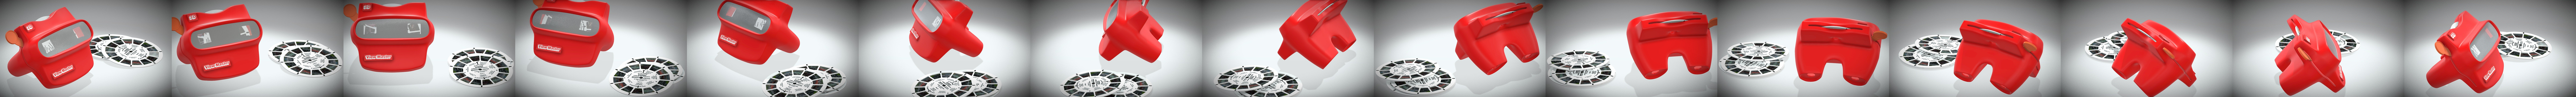 View-Master 3D [Animated] - Download Free 3D model by AORV (@aorv